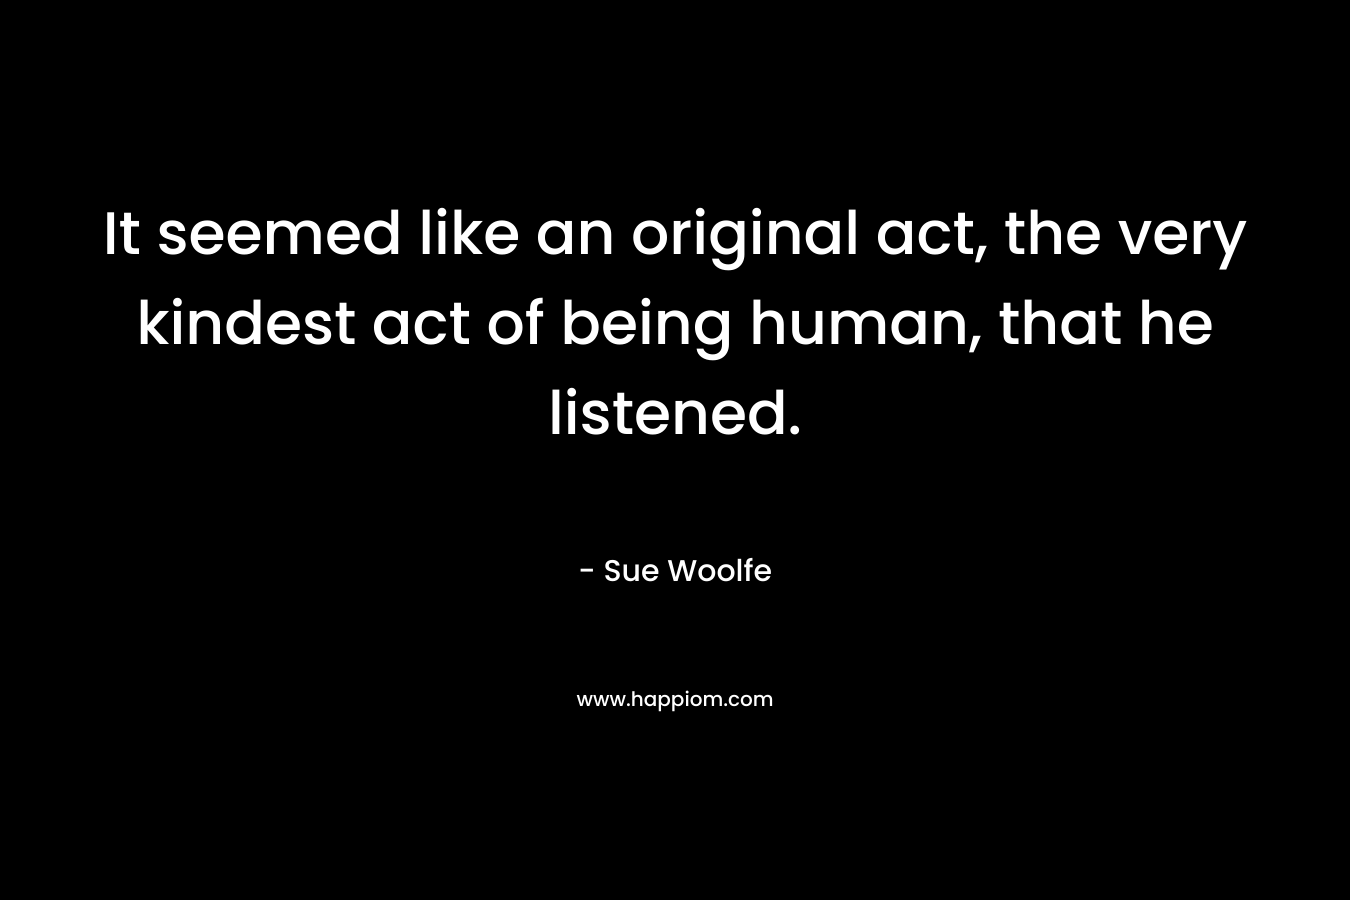 It seemed like an original act, the very kindest act of being human, that he listened. – Sue Woolfe